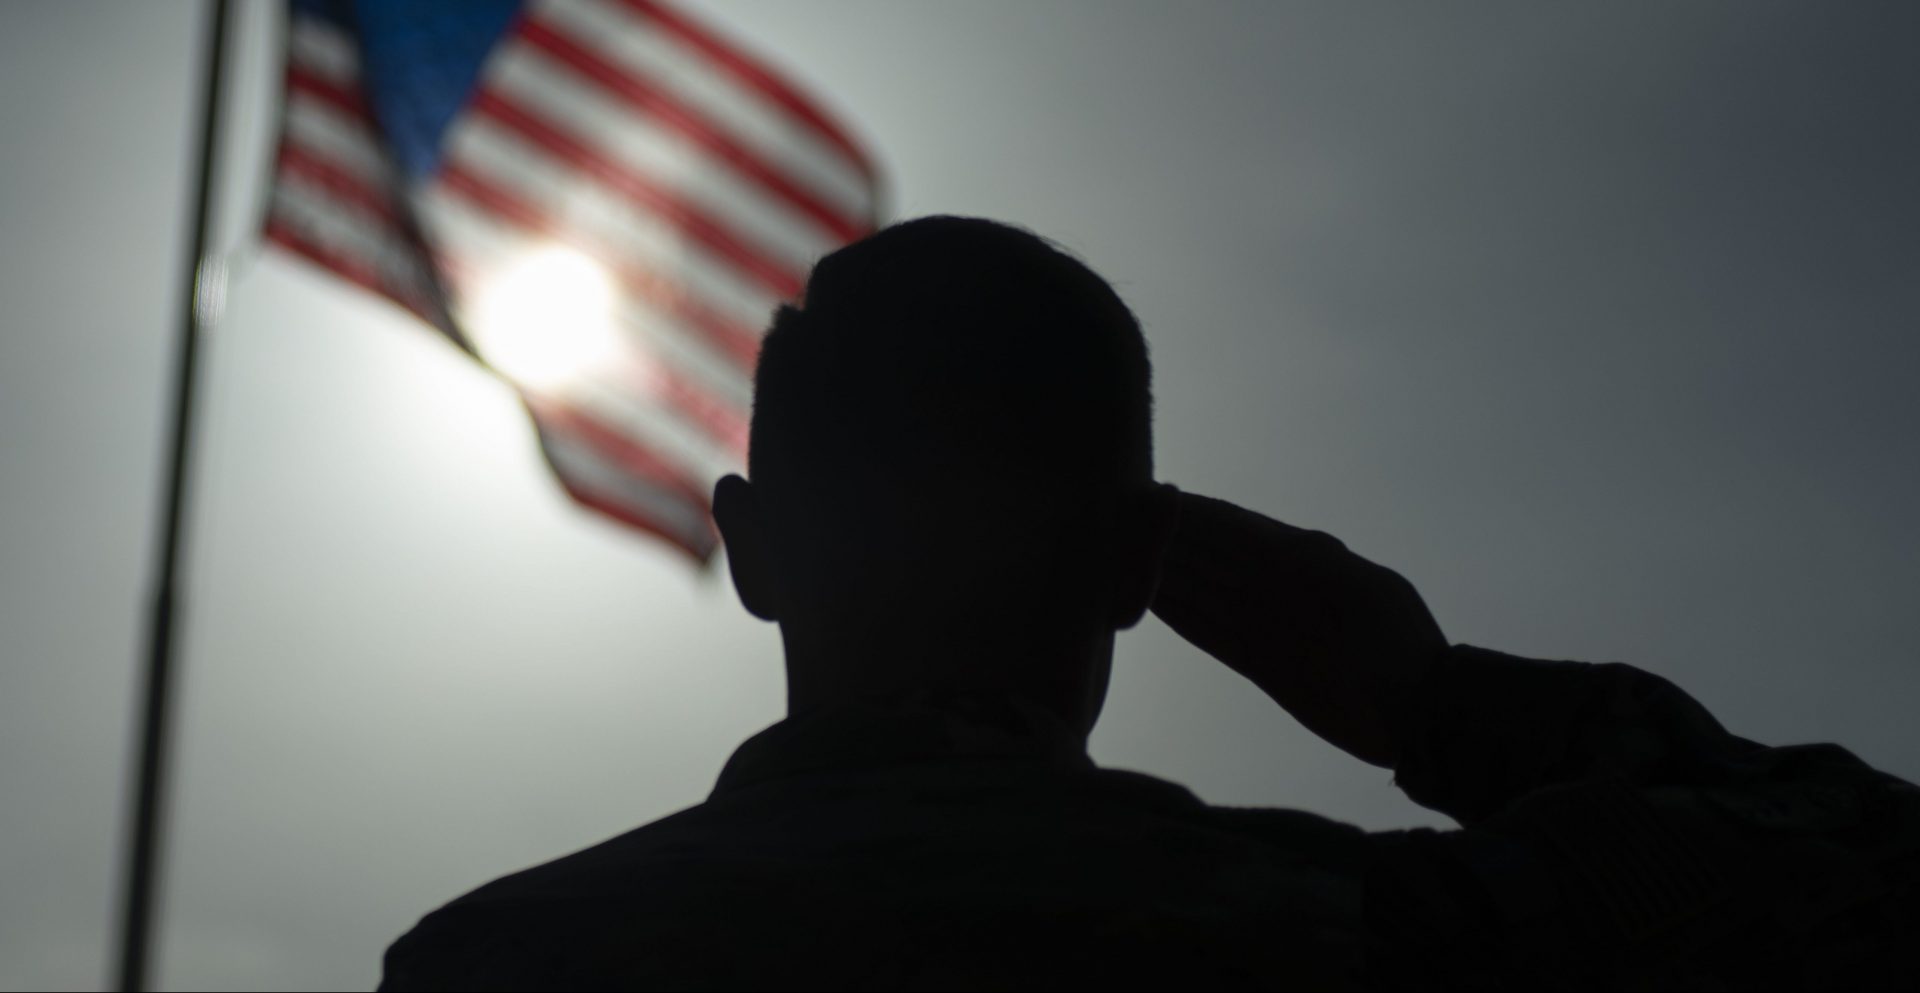 In this photo taken Aug. 26, 2019 and released by the U.S. Air Force, U.S. Air Force Staff Sgt. Devin Boyer, 435th Air Expeditionary Wing photojournalist, salutes the flag during a ceremony signifying the change from tactical to enduring operations at Camp Simba, Manda Bay, Kenya. The al-Shabab extremist group said Sunday, Jan. 5, 2020 that it has attacked the Camp Simba military base used by U.S. and Kenyan troops in coastal Kenya, while Kenya's military says the attempted pre-dawn breach was repulsed and at least four attackers were killed. 